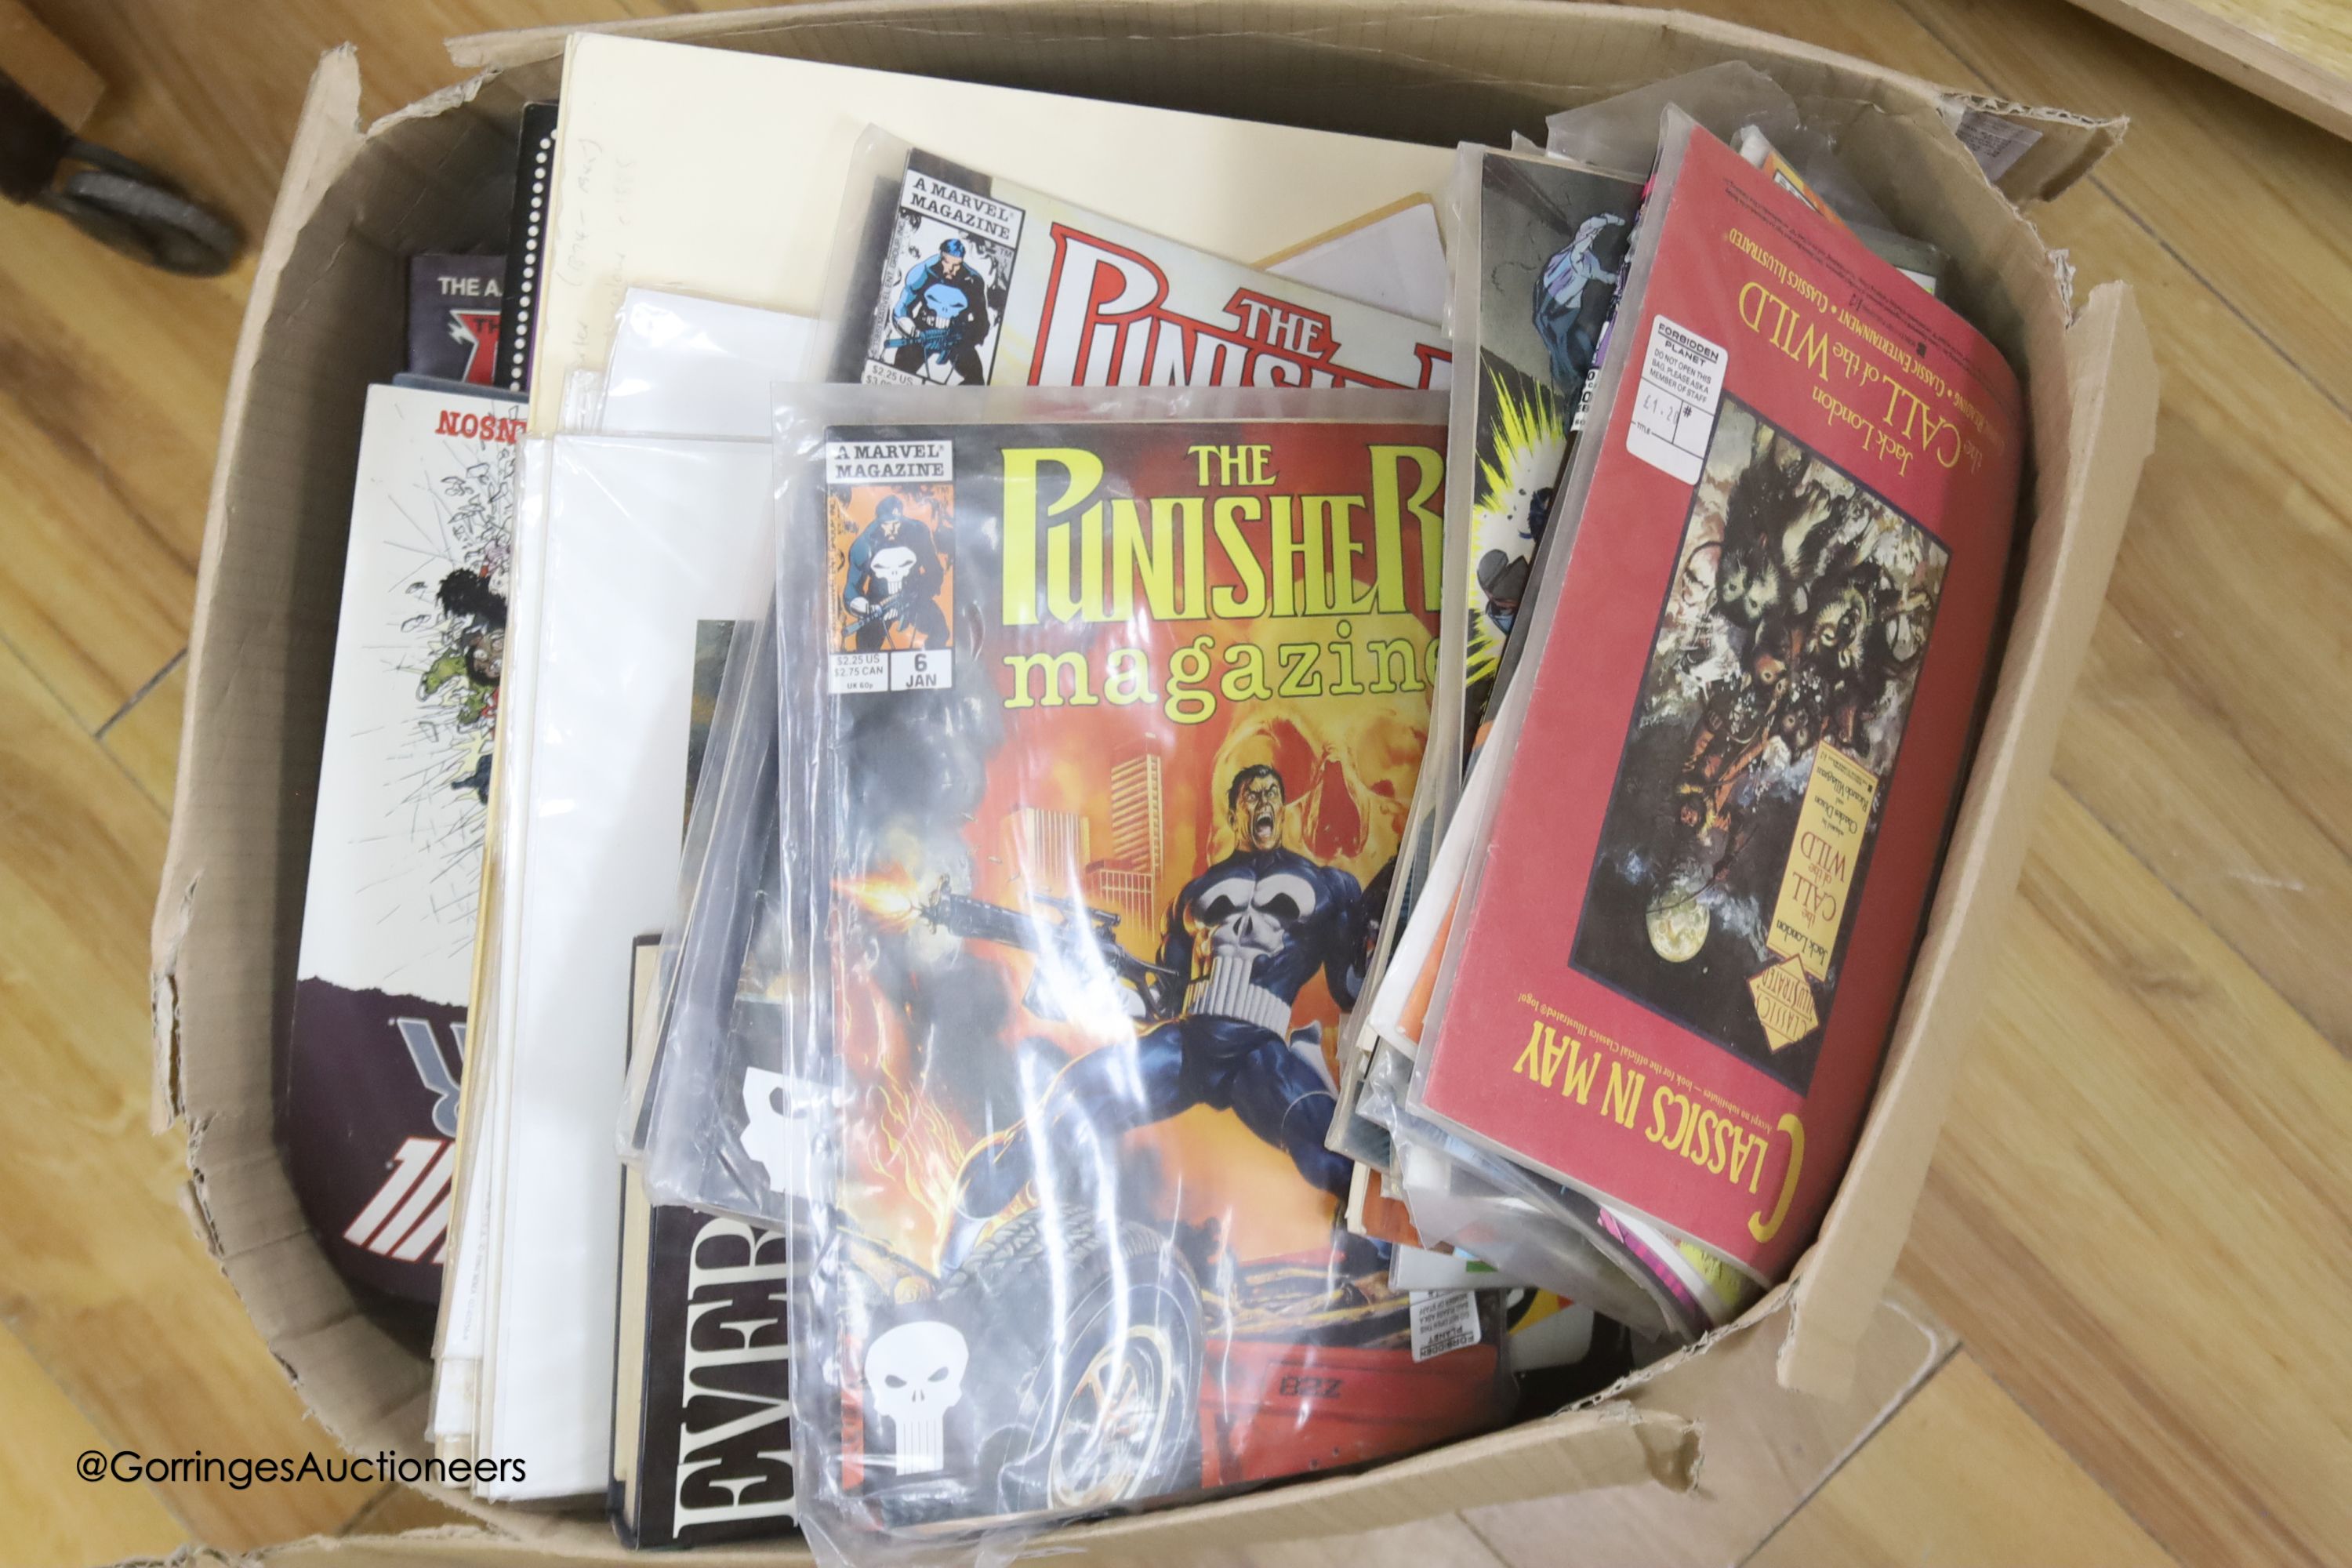 A collection of vintage comics